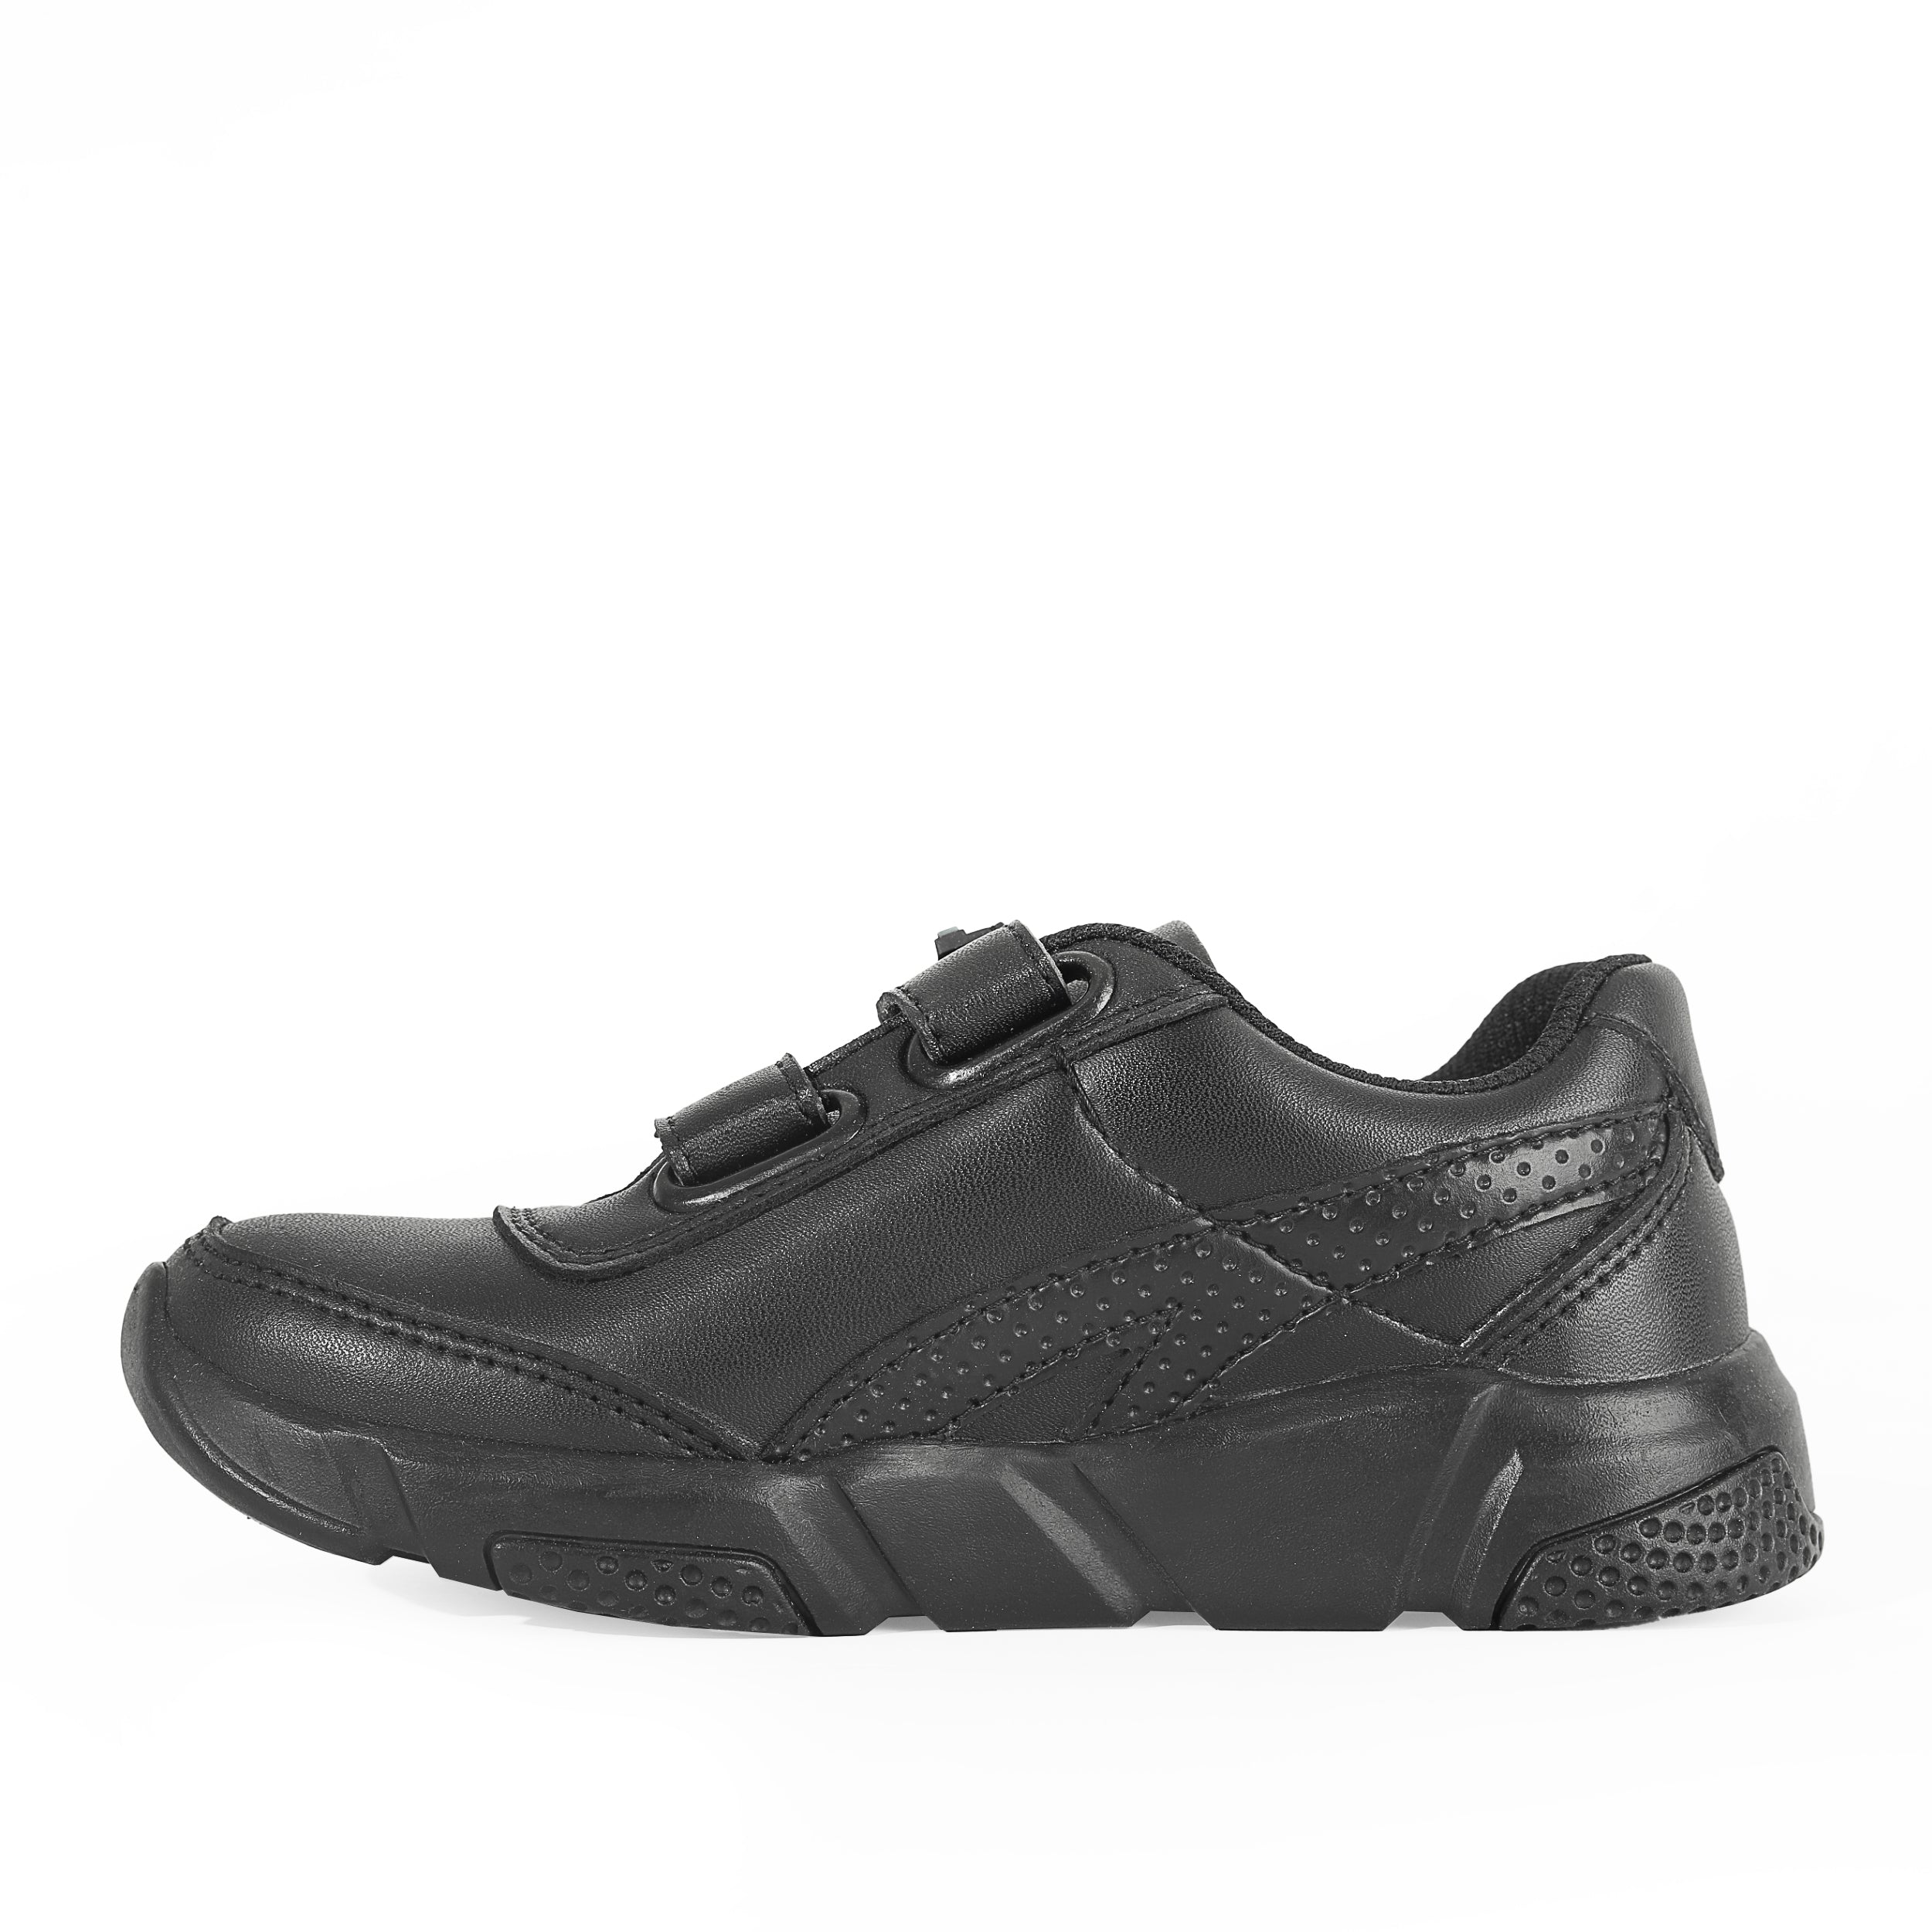 Black Shoes with Pull Tab for Kids F10